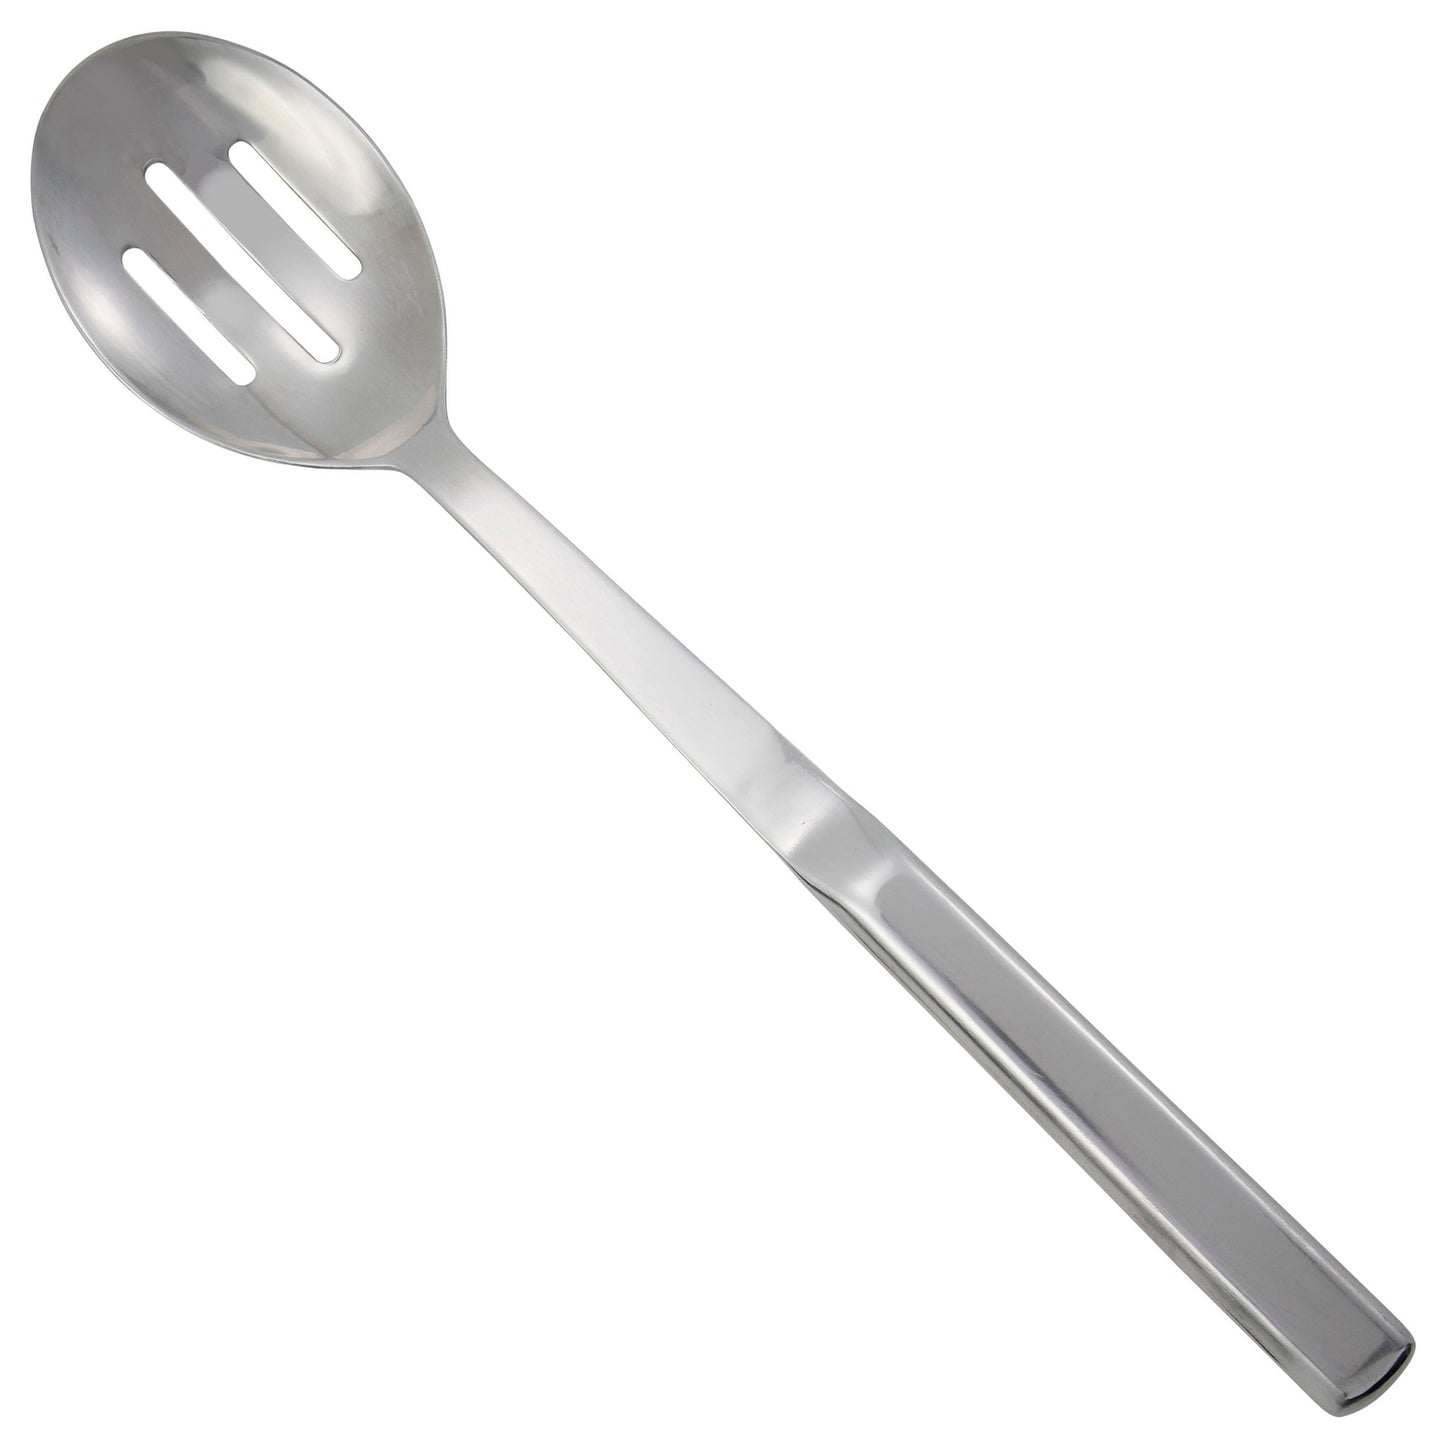 BW-SL2 - 11-3/4" Slotted Spoon, Hollow Handle, Stainless Steel